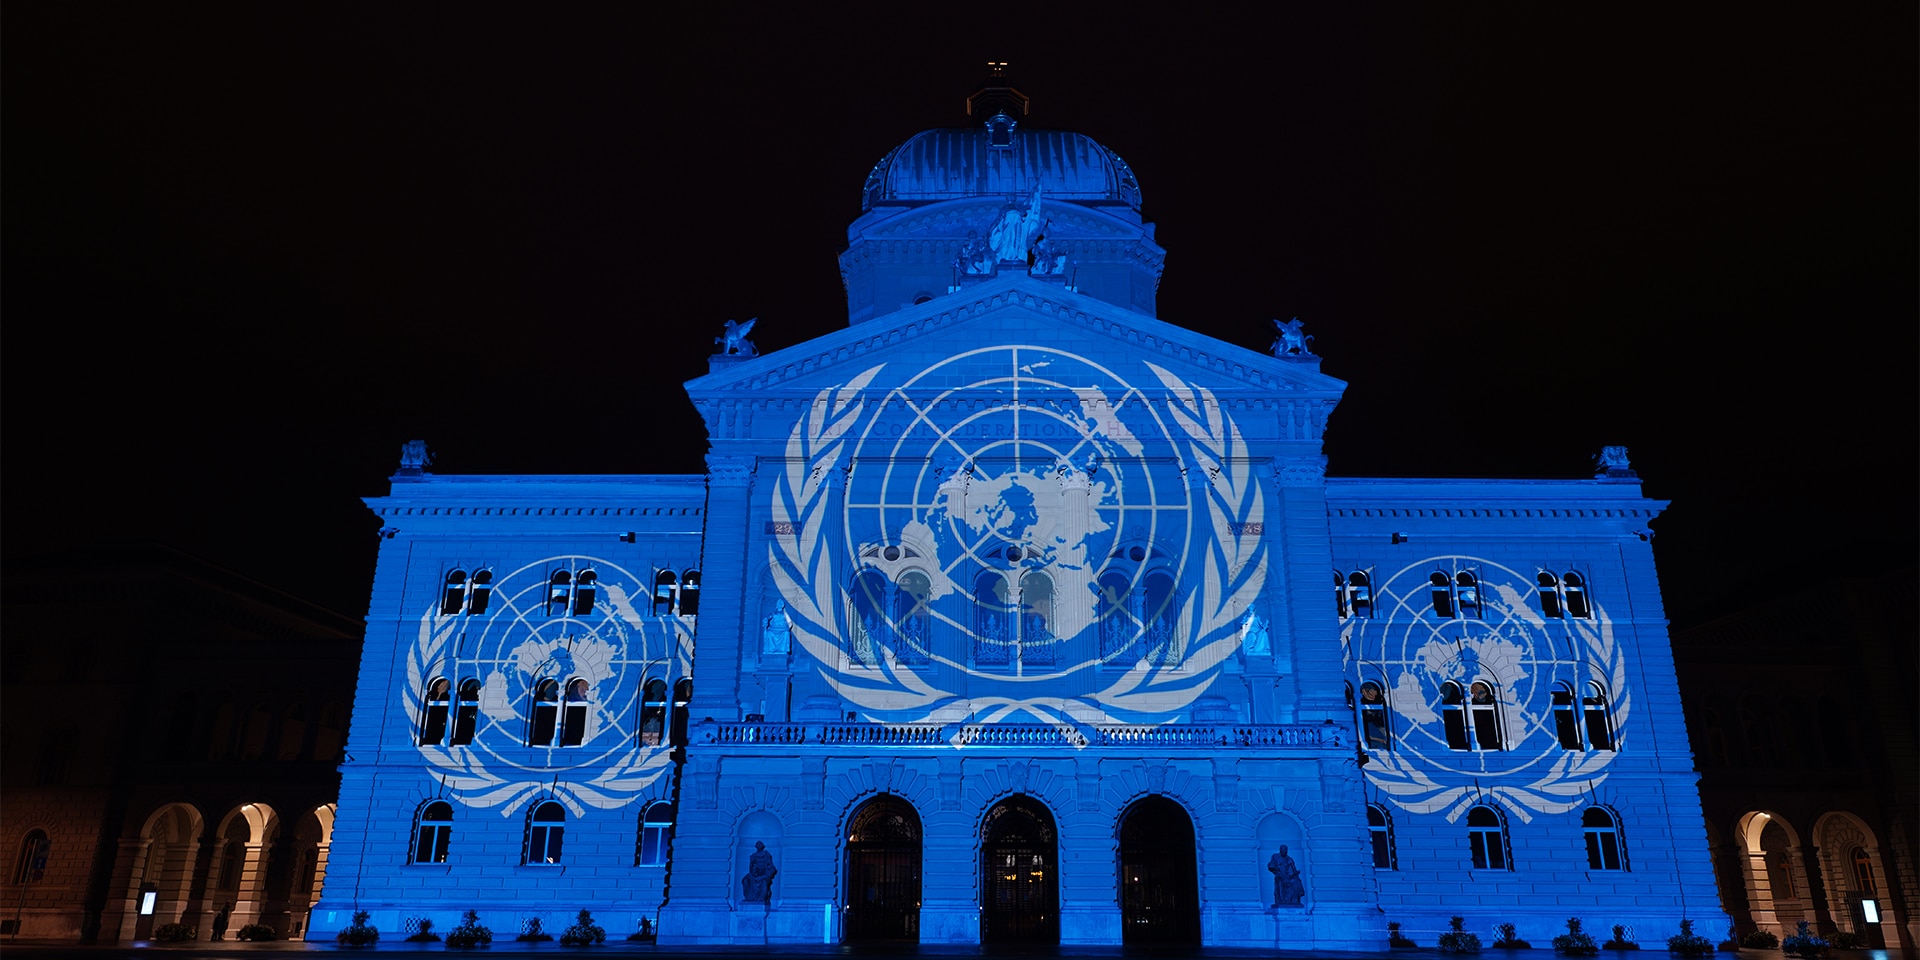 The United Nations flag is projected onto the front of the Federal Palace.